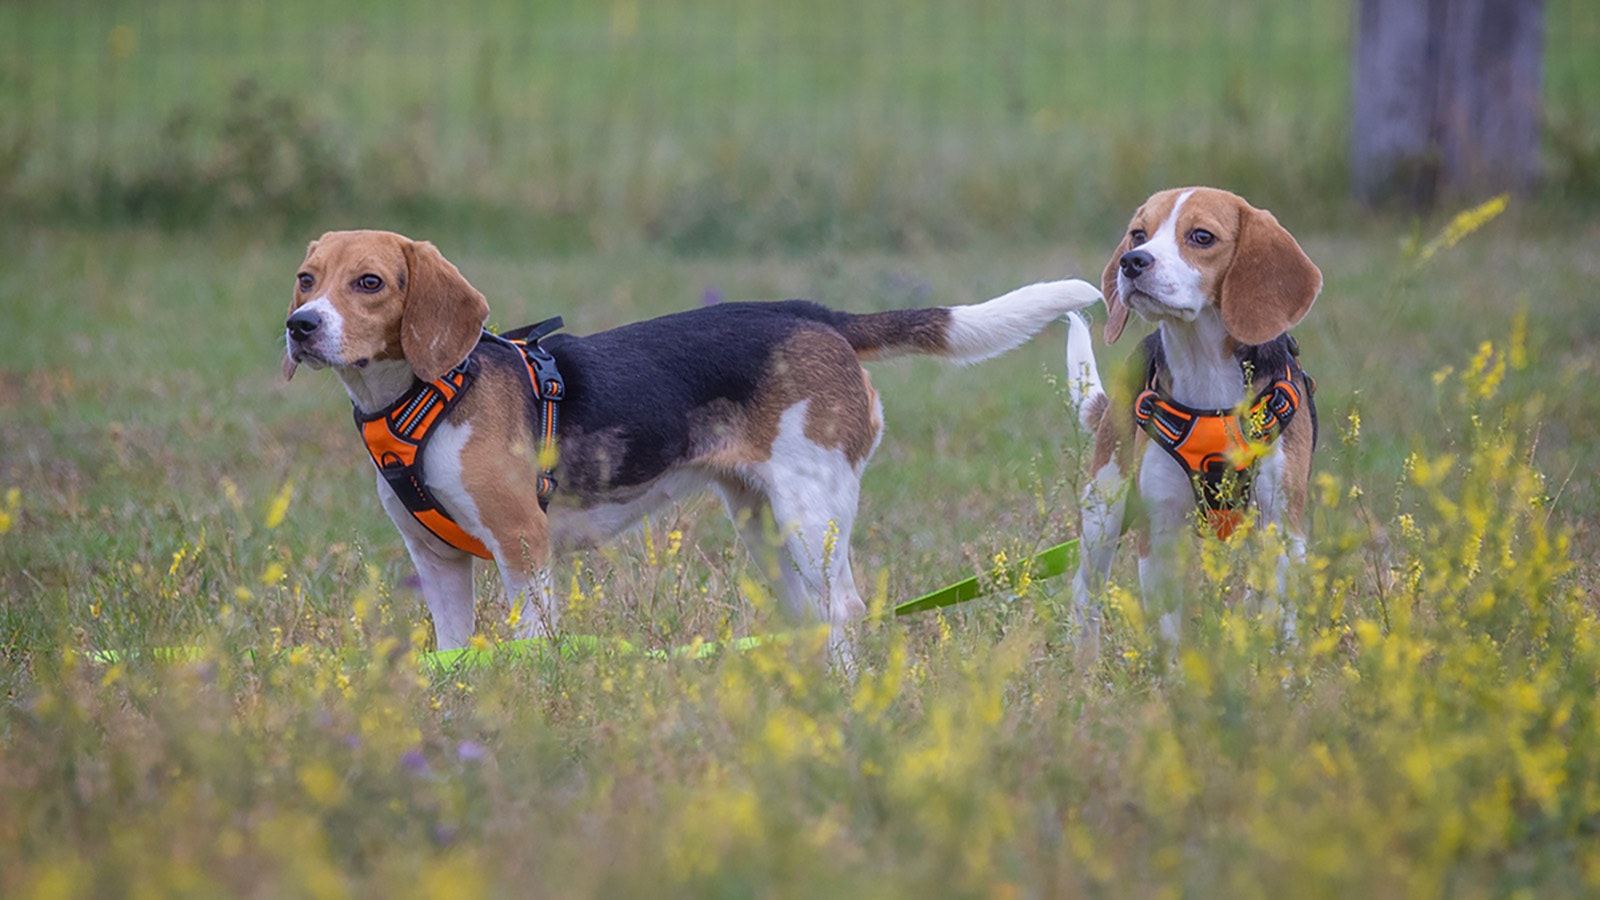 Kindness Ranch in Wyoming rescued 150 beagles from being lab testing animals earlier this year and continues to bring in animals for rehabilitation and adoption.